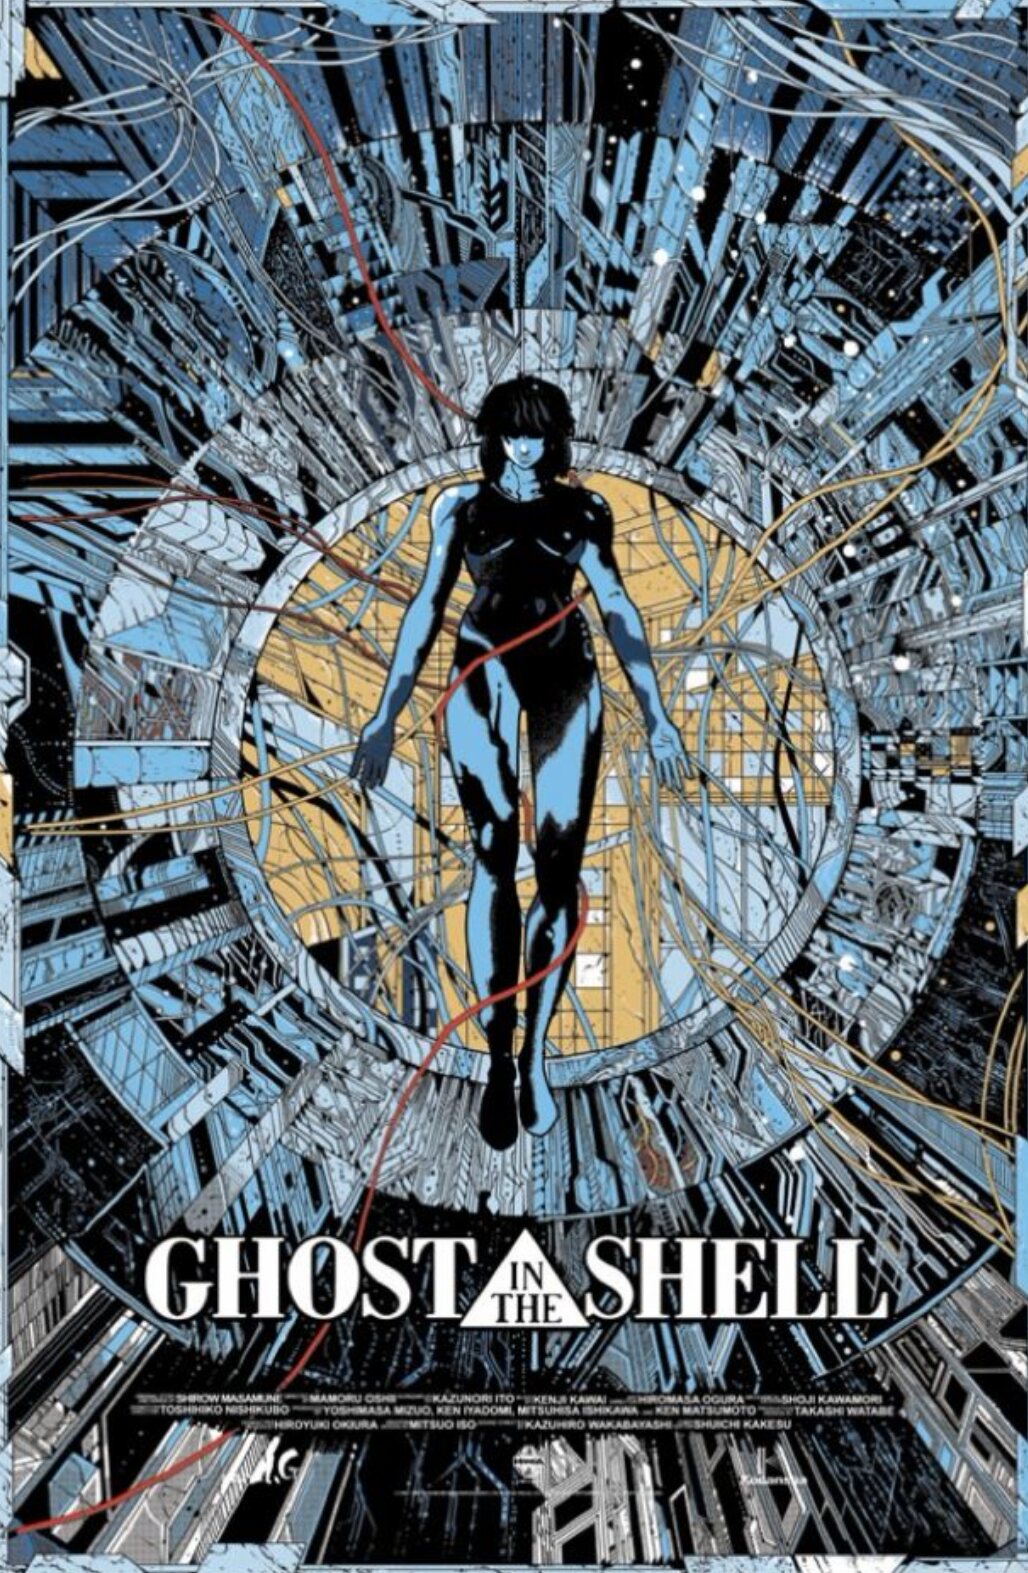 Anime At The Revue: GHOST IN THE SHELL (1995) - Presented By MUBI, Revue  Cinema, Toronto, 9 May